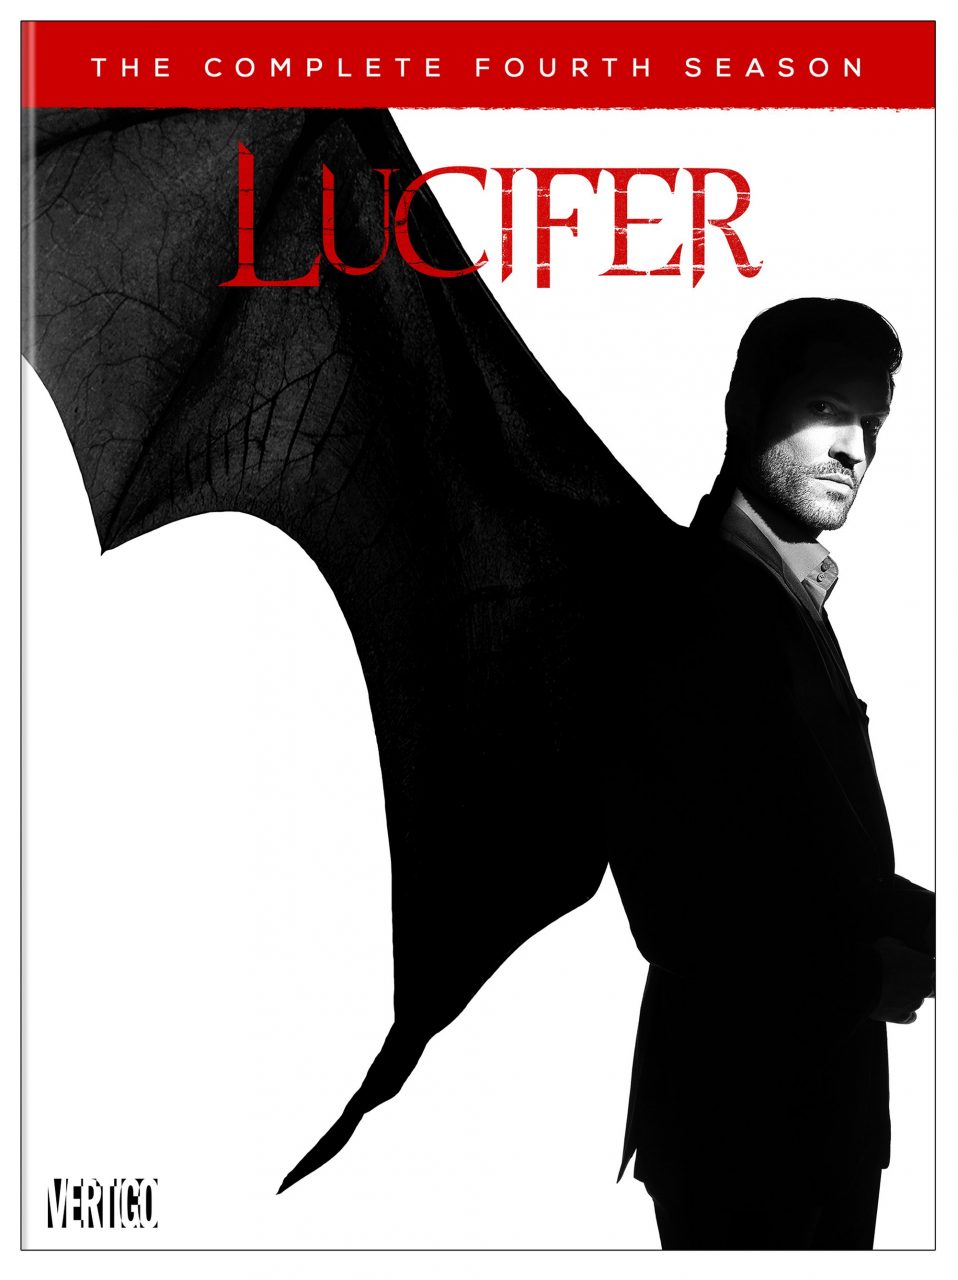 Lucifer: The Complete Fourth Season DVD cover (Warner Bros. Home Entertainment)